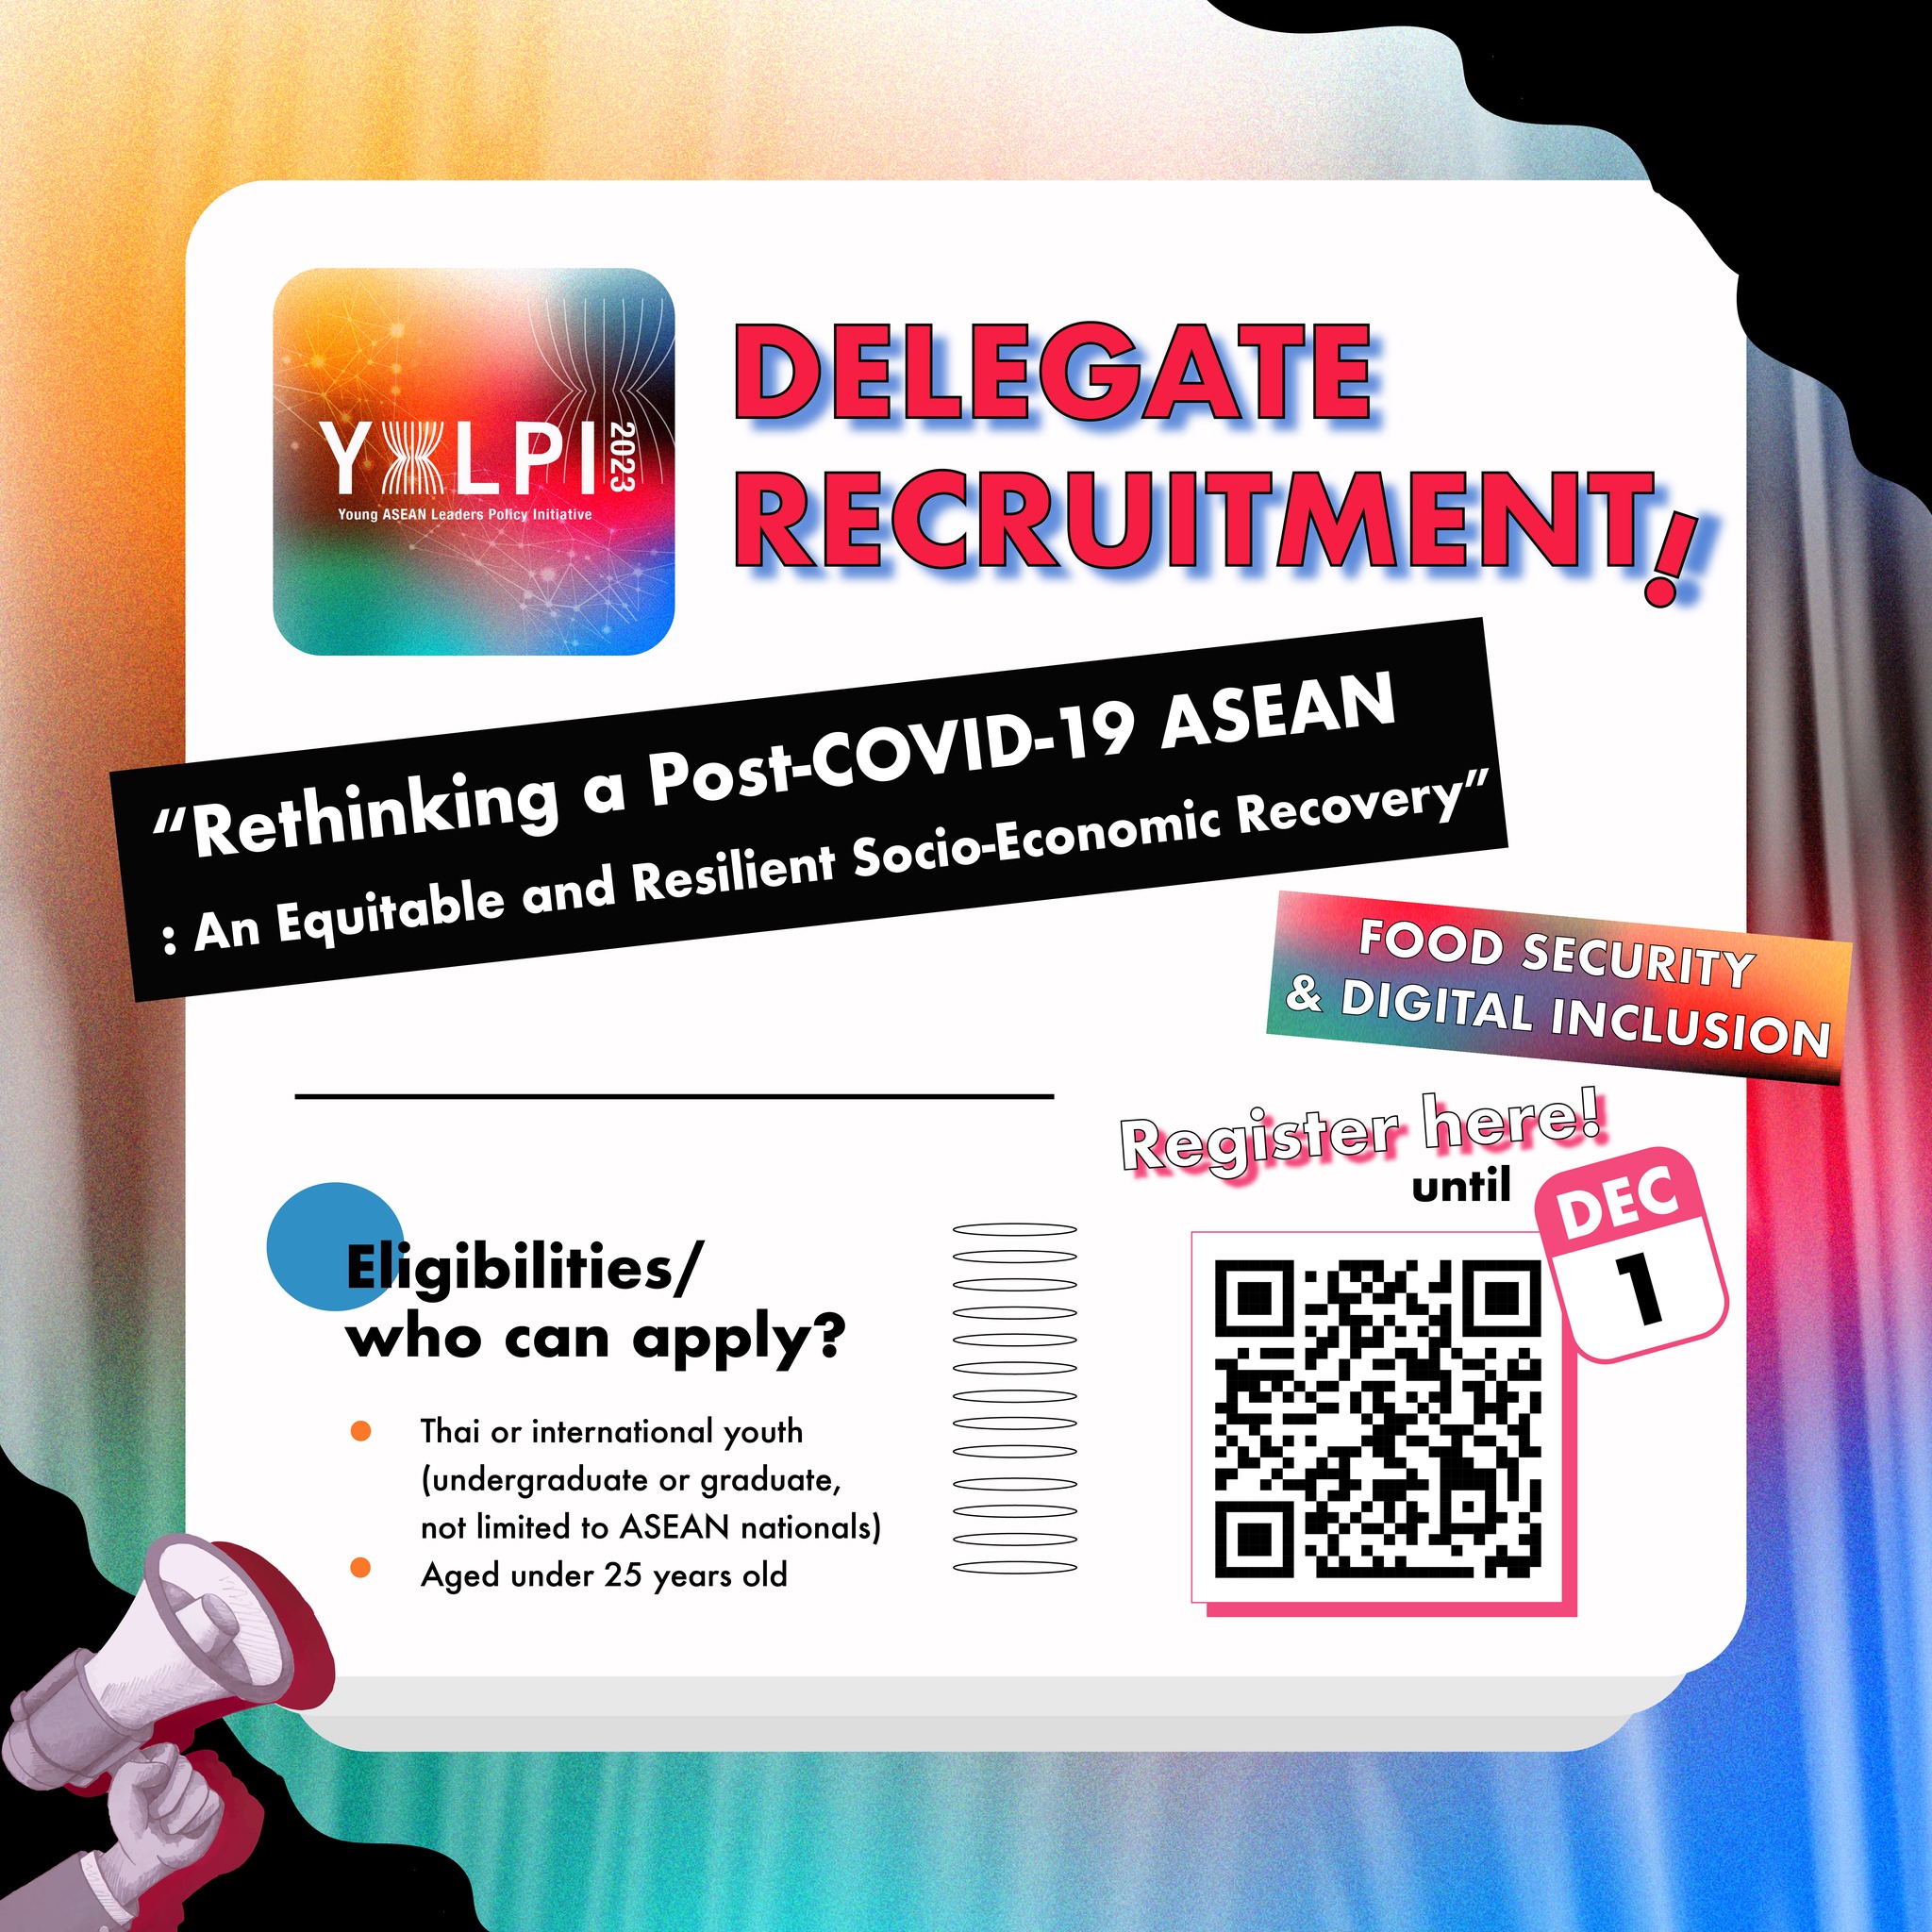 Invitation to the 7th Young ASEAN Leaders Policy Initiative (YALPI) 2023